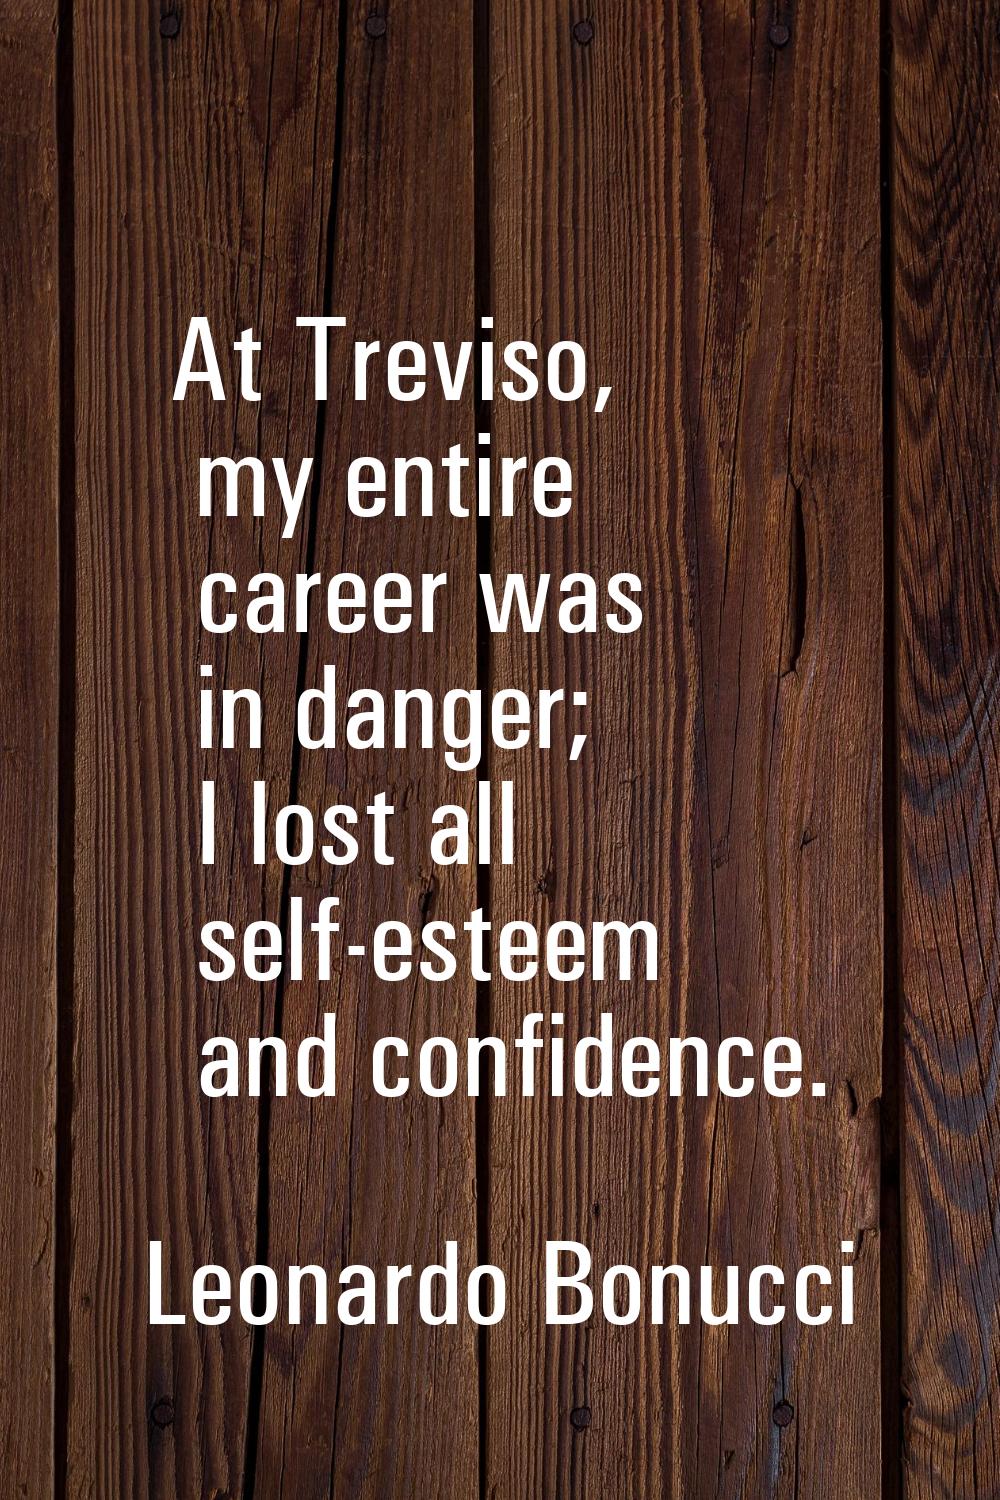 At Treviso, my entire career was in danger; I lost all self-esteem and confidence.